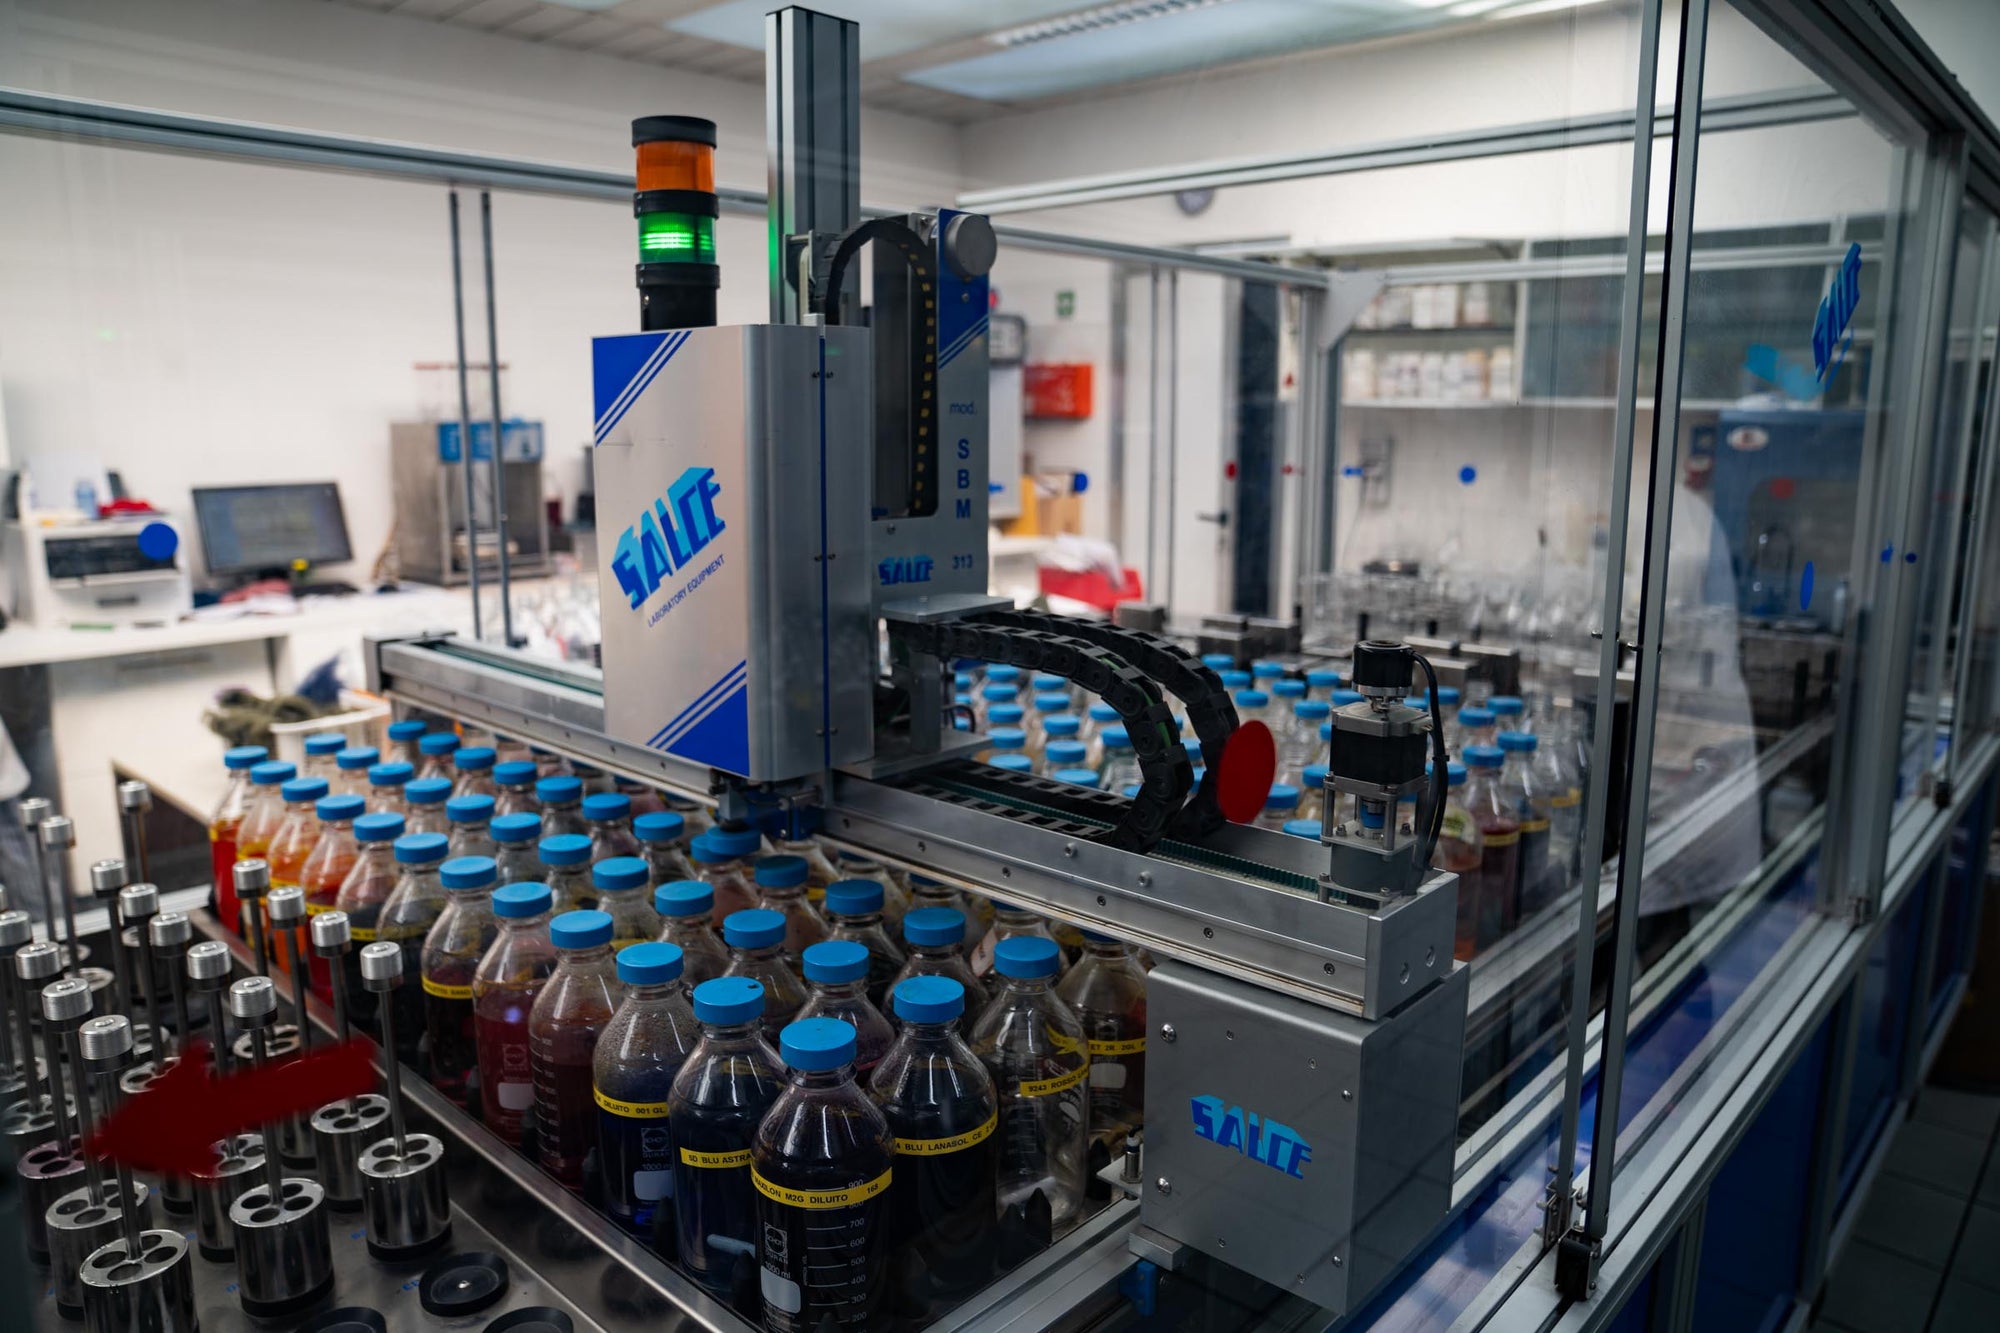 A robot arm filling bottles with dye colors in a lab installation at Tintoria Ferraris.